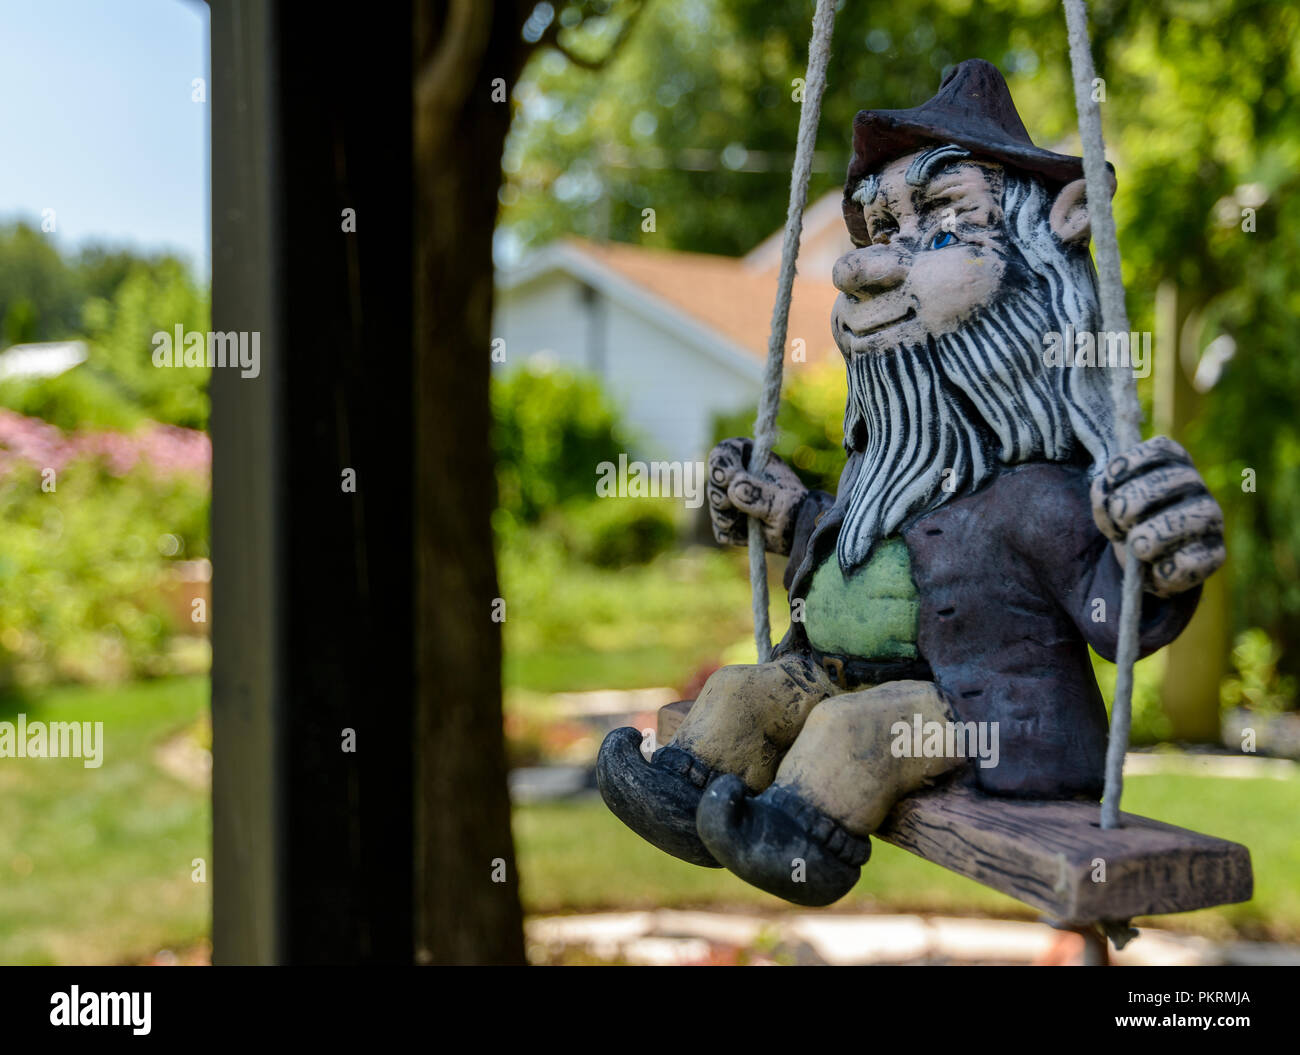 Rustic Looking Male Gnome With A White Beard And A Hat On A Swing With Gardens In The Background Stock Photo